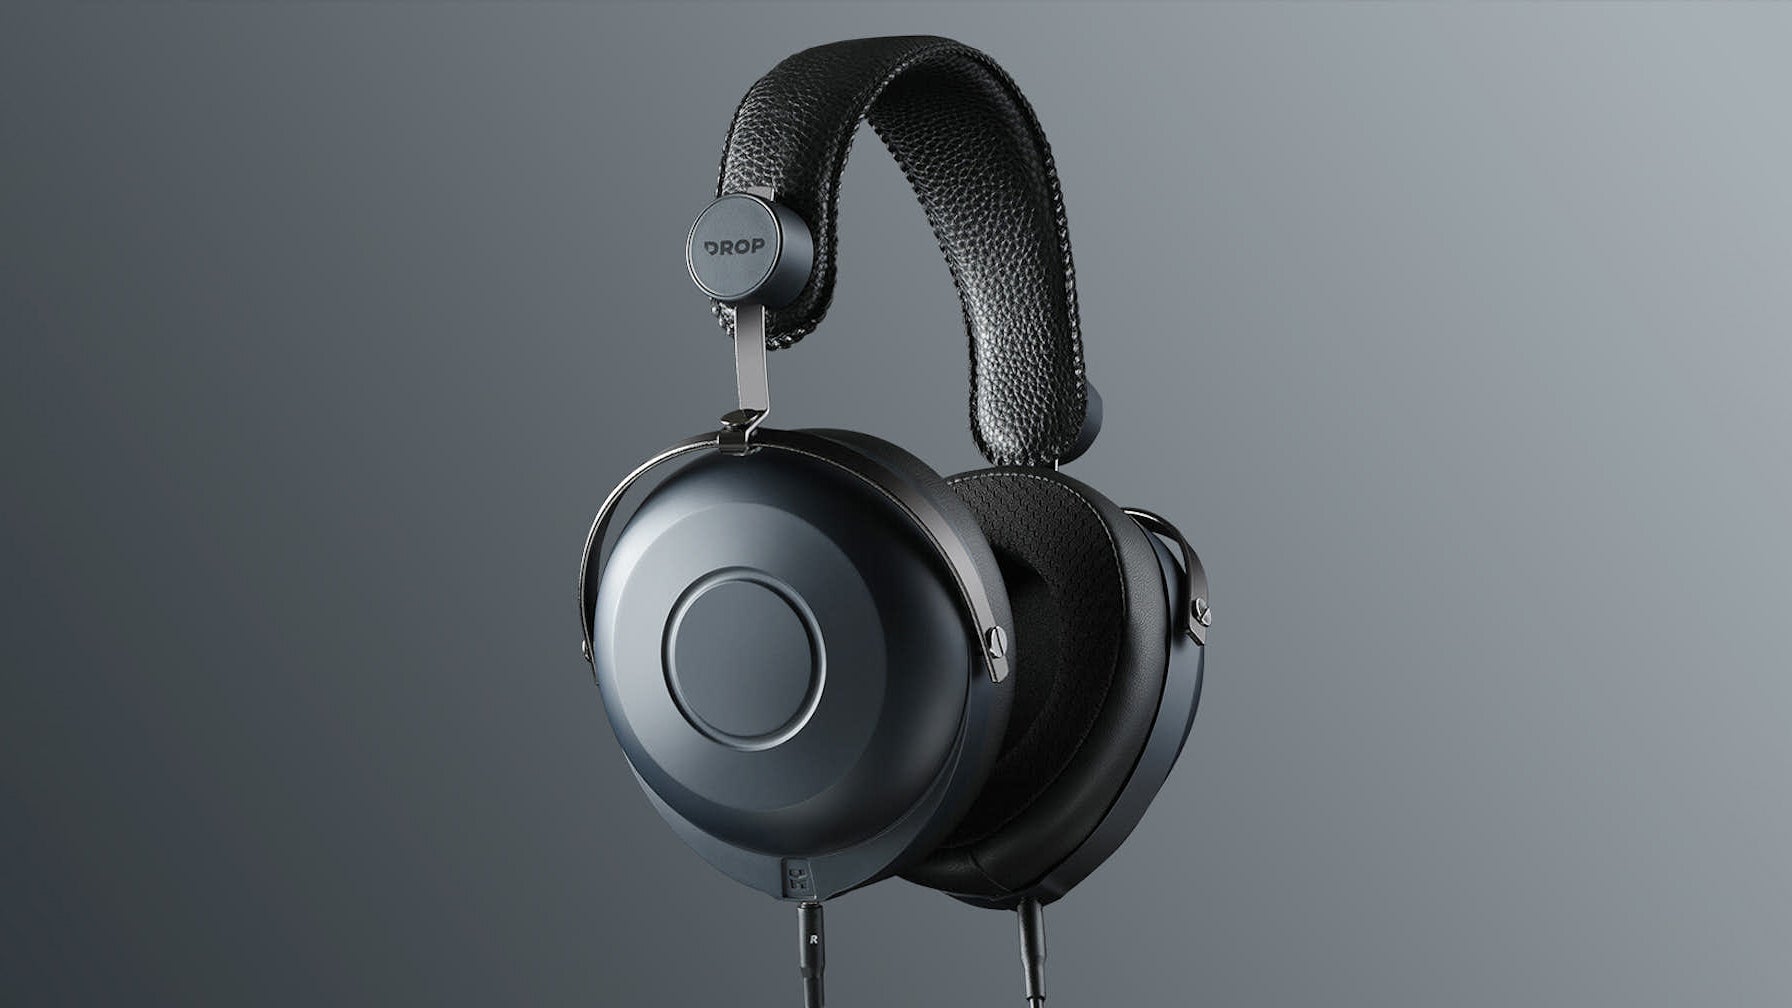 Drop + Hifiman HE-R7DX review: these $99 headphones are worth 